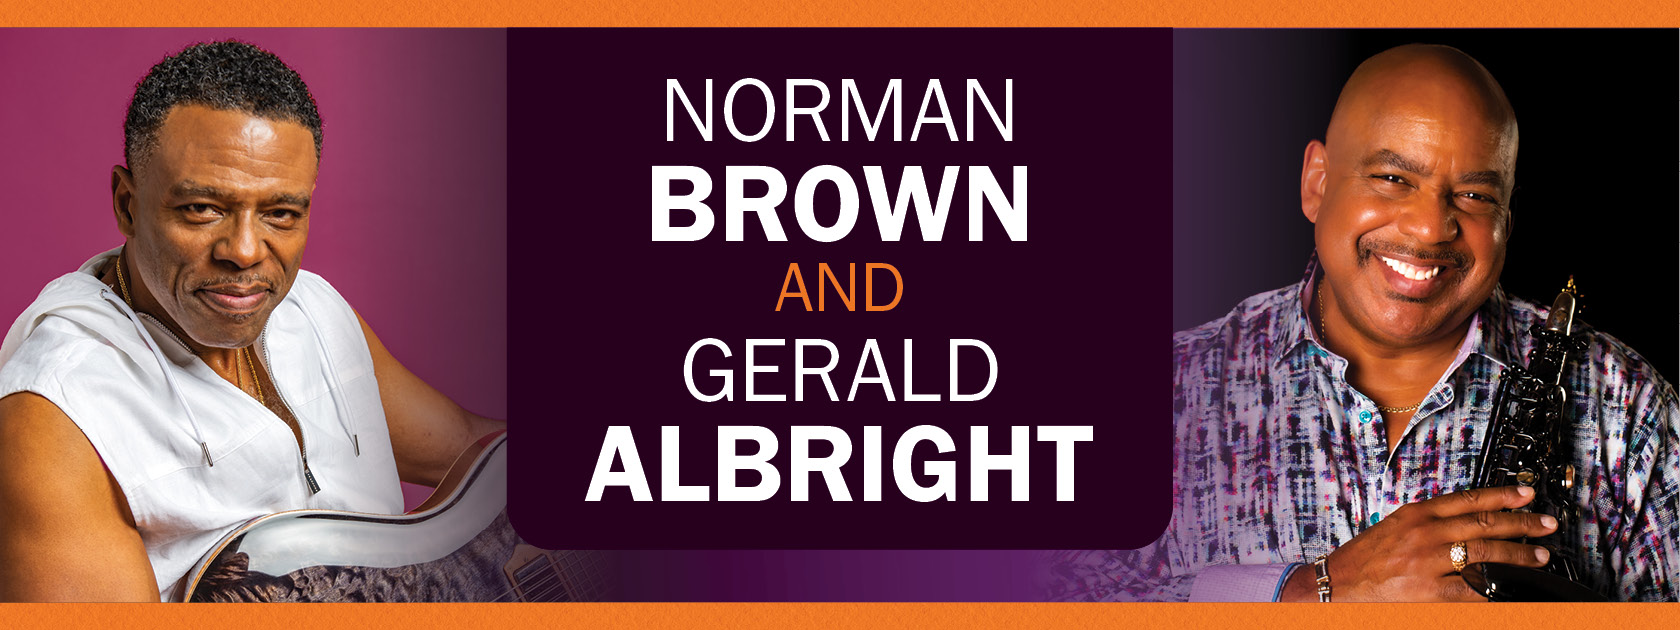 Norman Brown and Gerald Albright